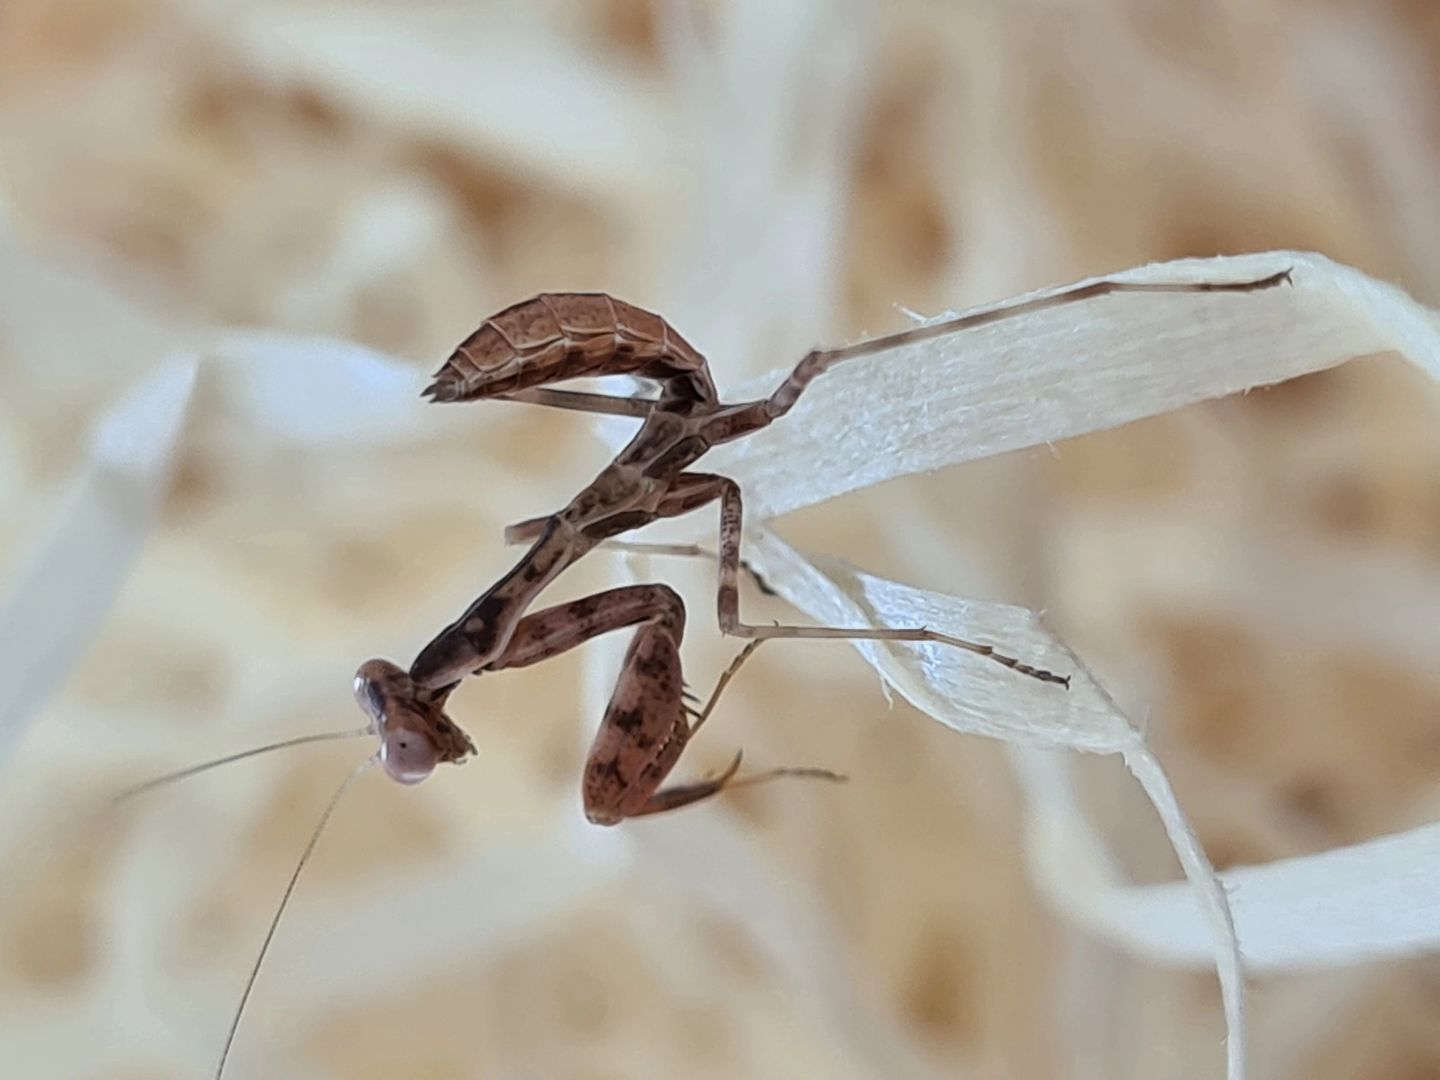 Cilnia humeralis - wide-armed mantis